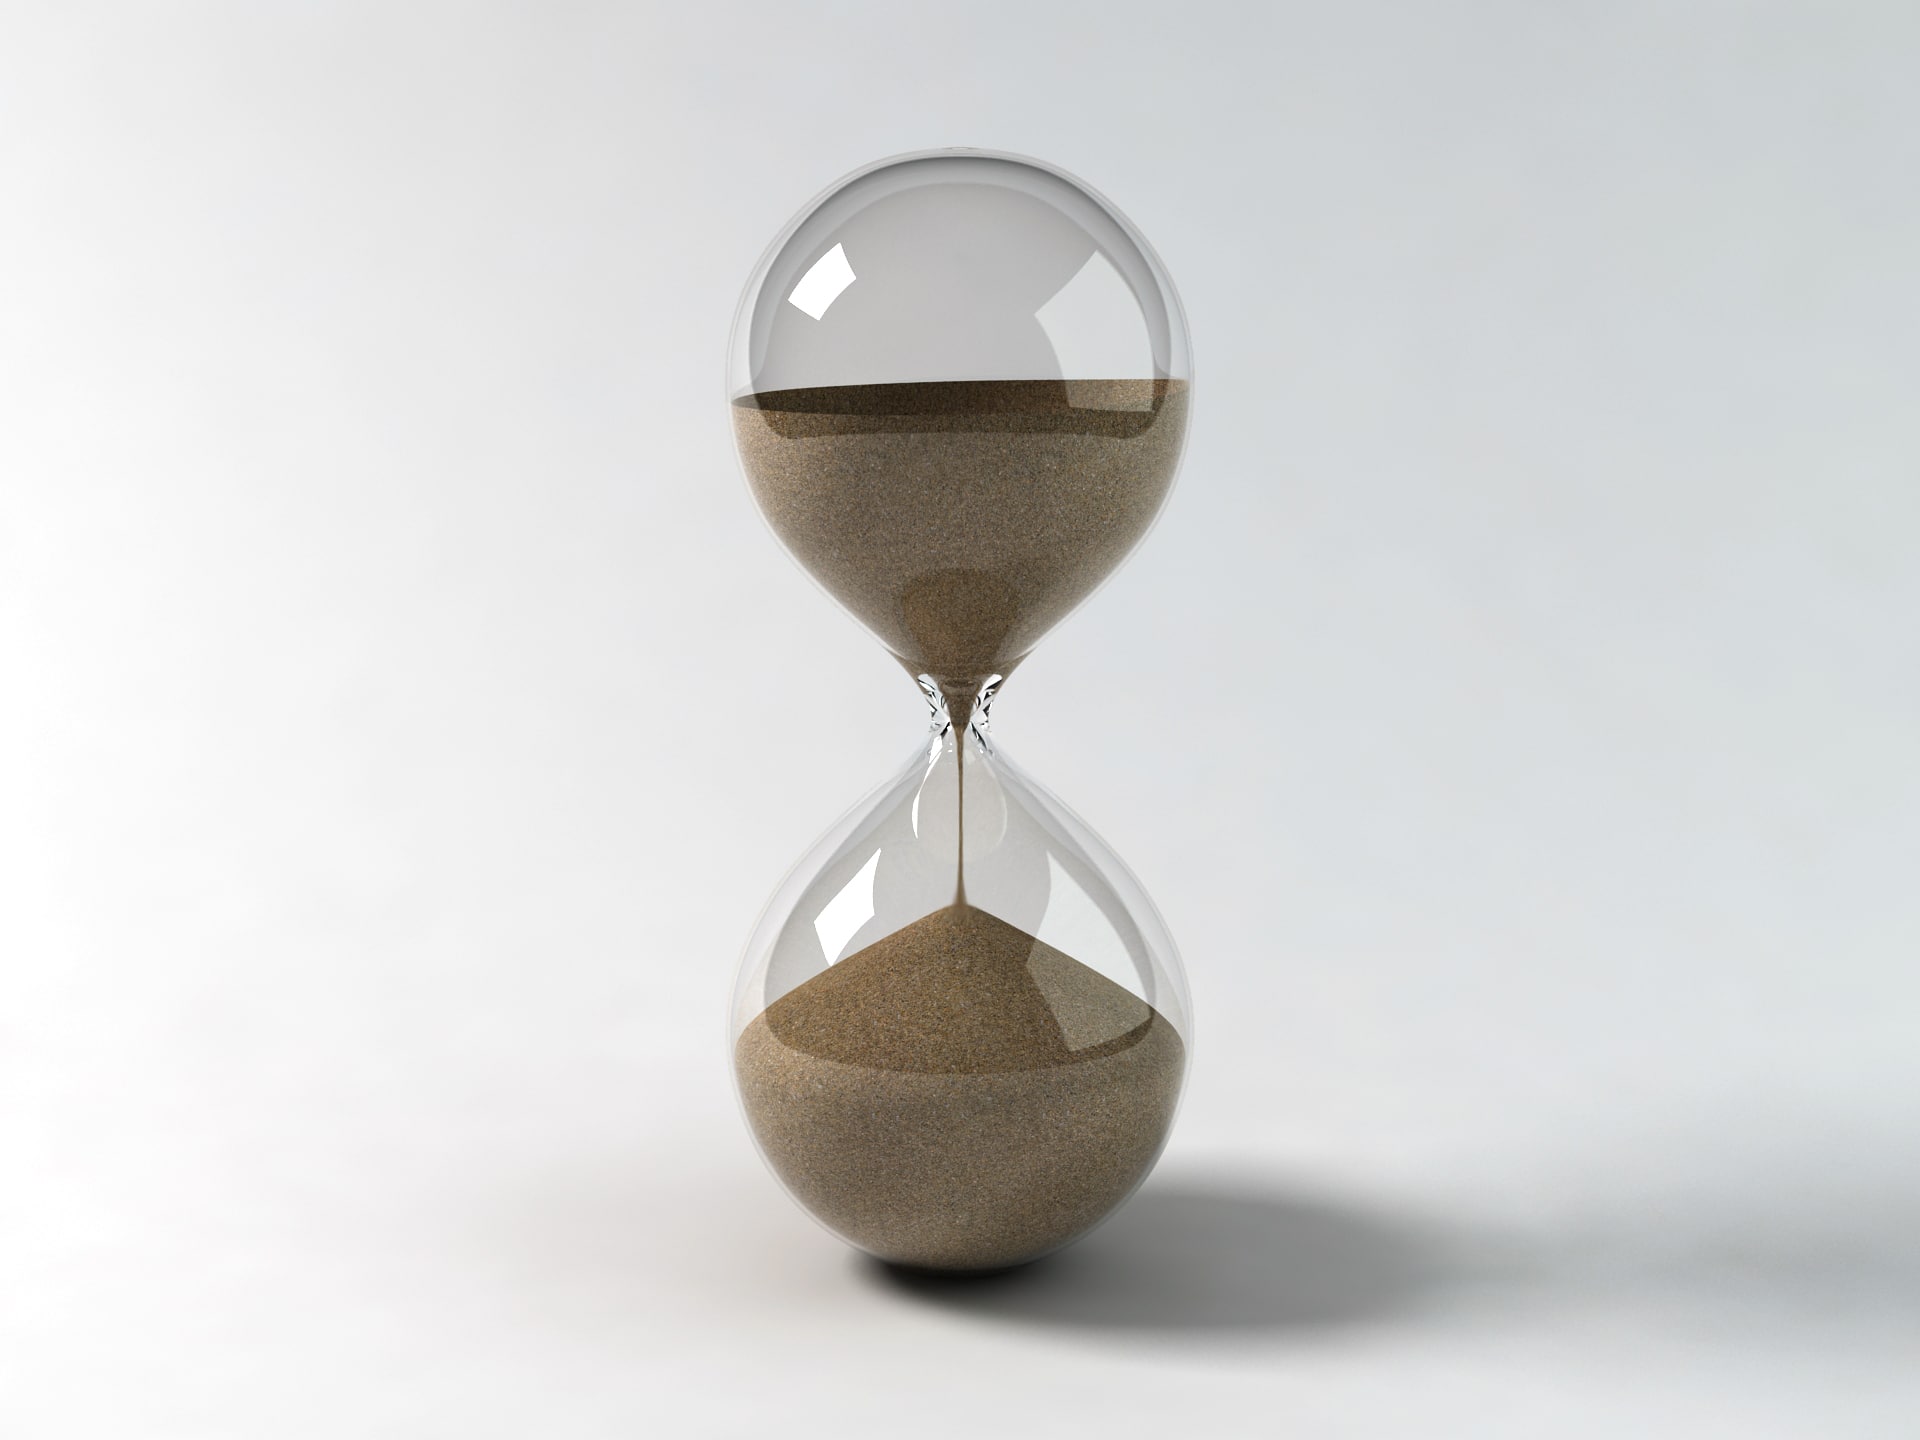 hourglass with sand to represent time passing